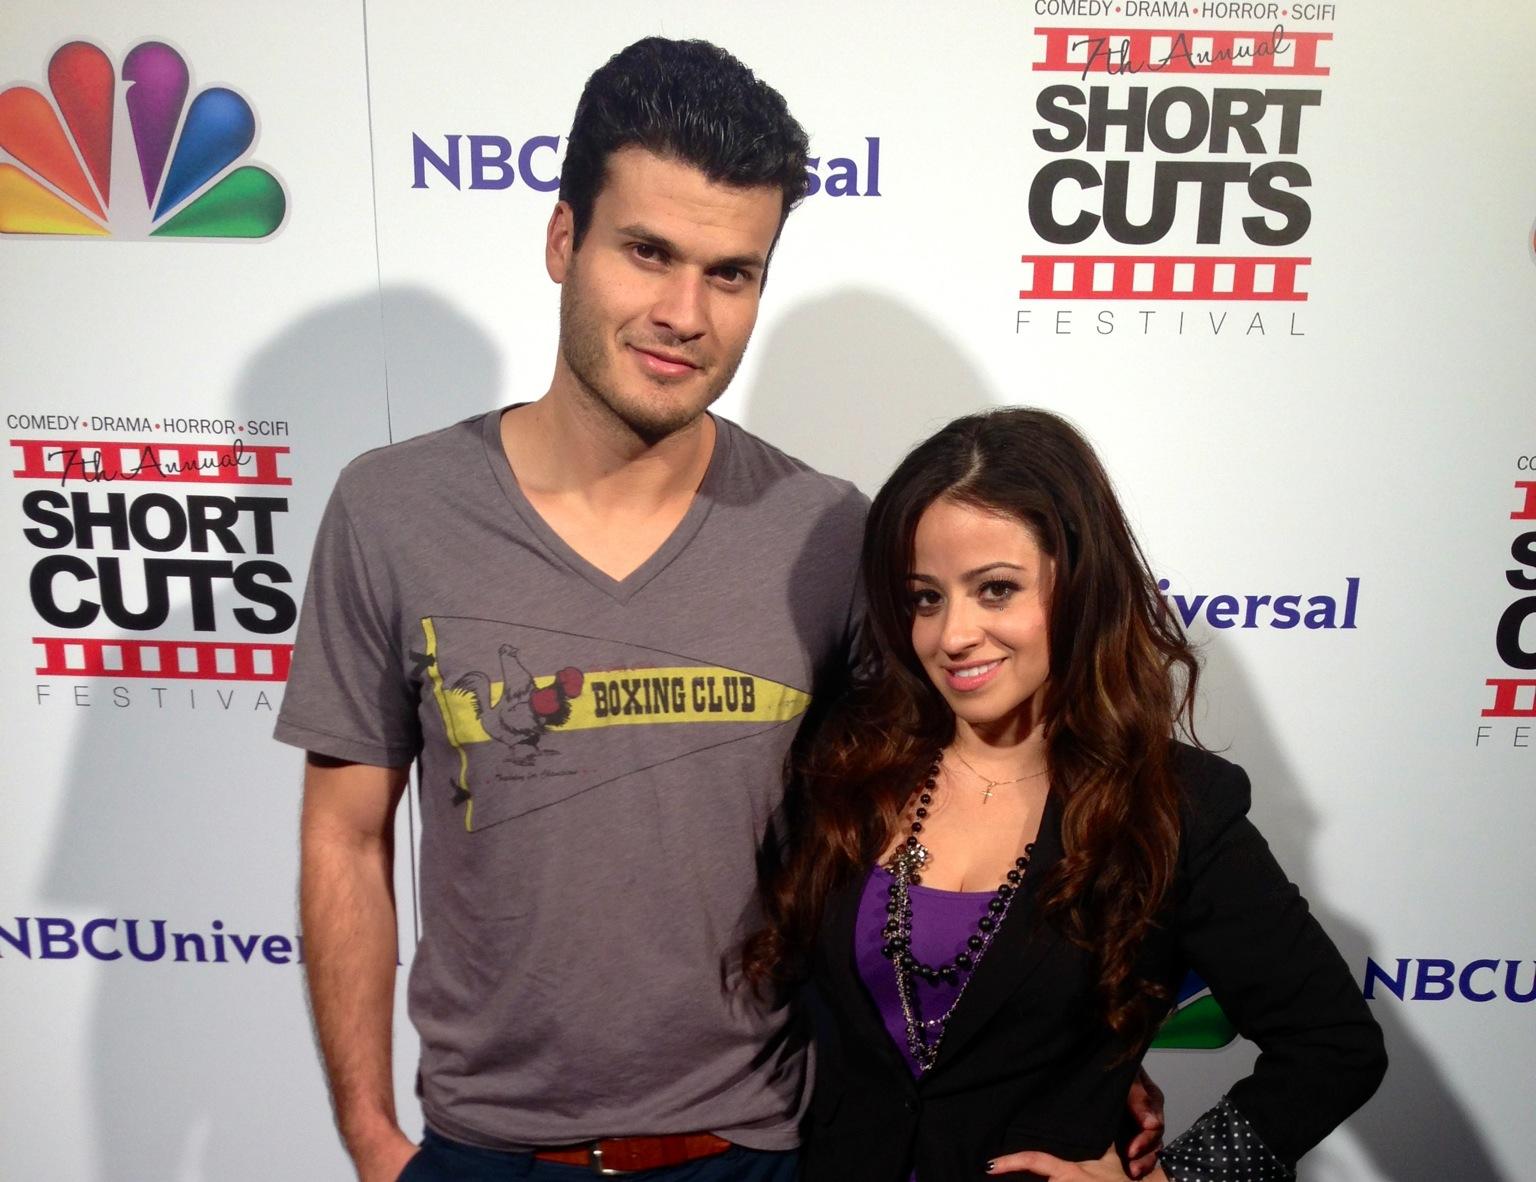 NBC Short Cuts festival with Actress Marisol Doblado, special thanks to Sky Gaven.